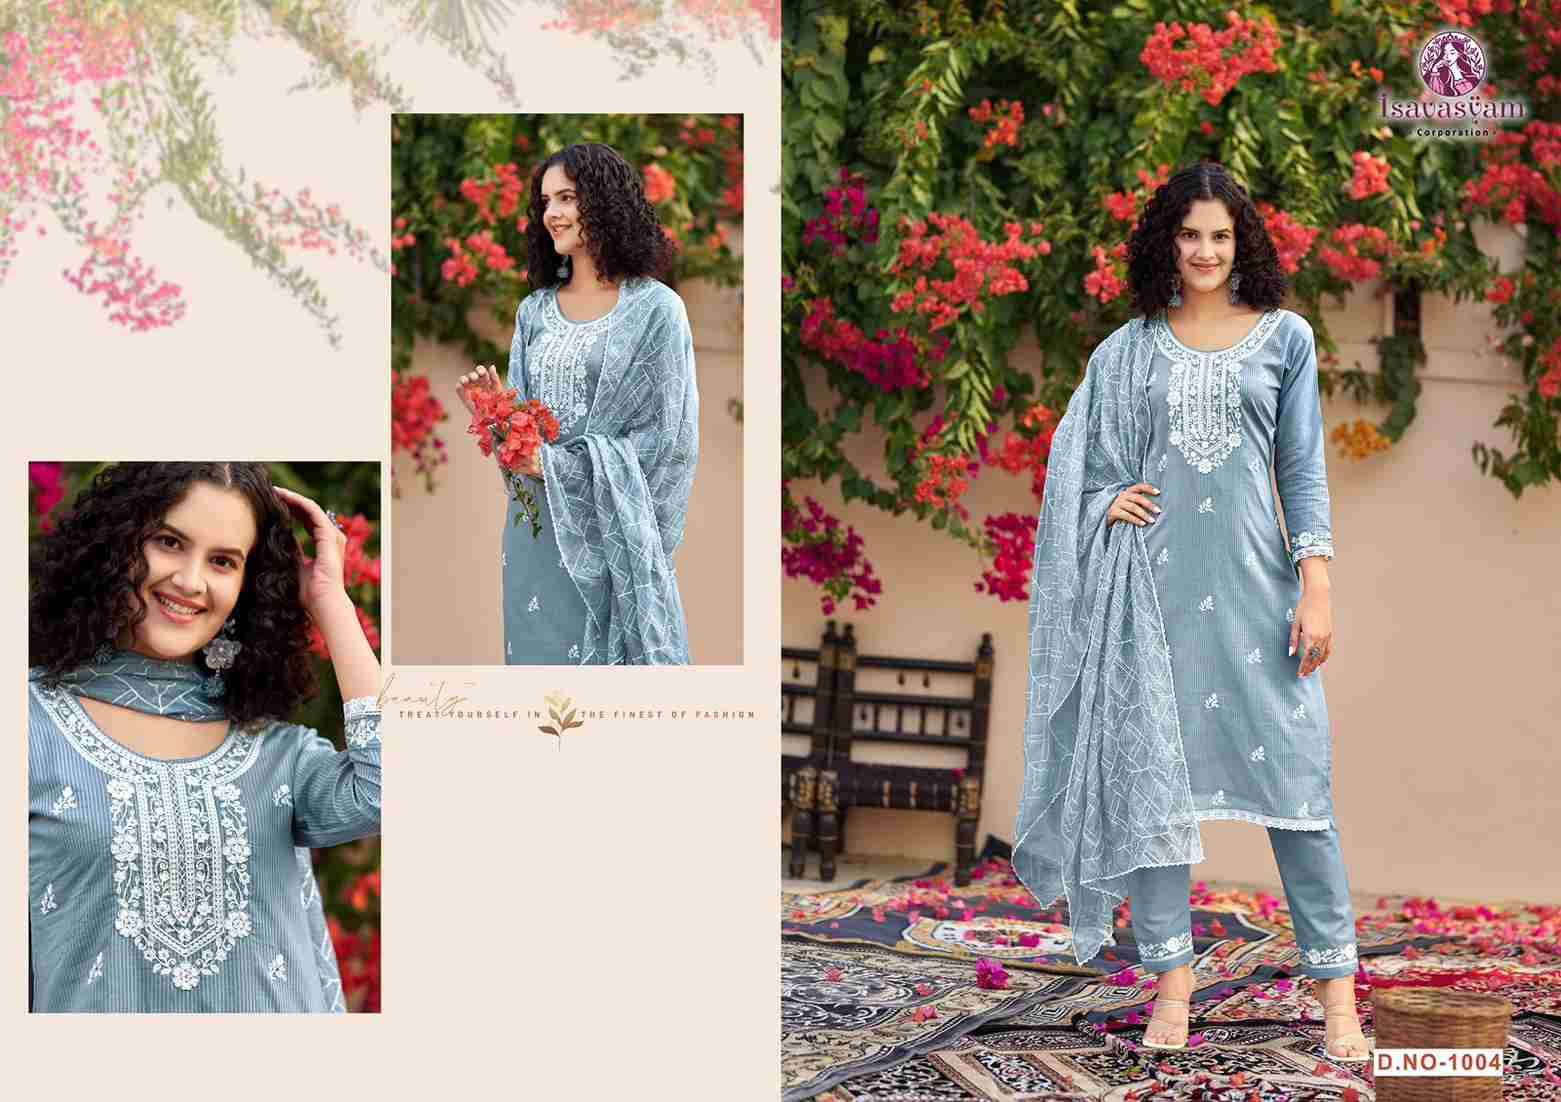 Cotton Sali By Isavasyam 1001 To 1004 Series Designer Stylish Fancy Colorful Beautiful Party Wear & Ethnic Wear Collection Pure Cambric Cotton Dresses At Wholesale Price